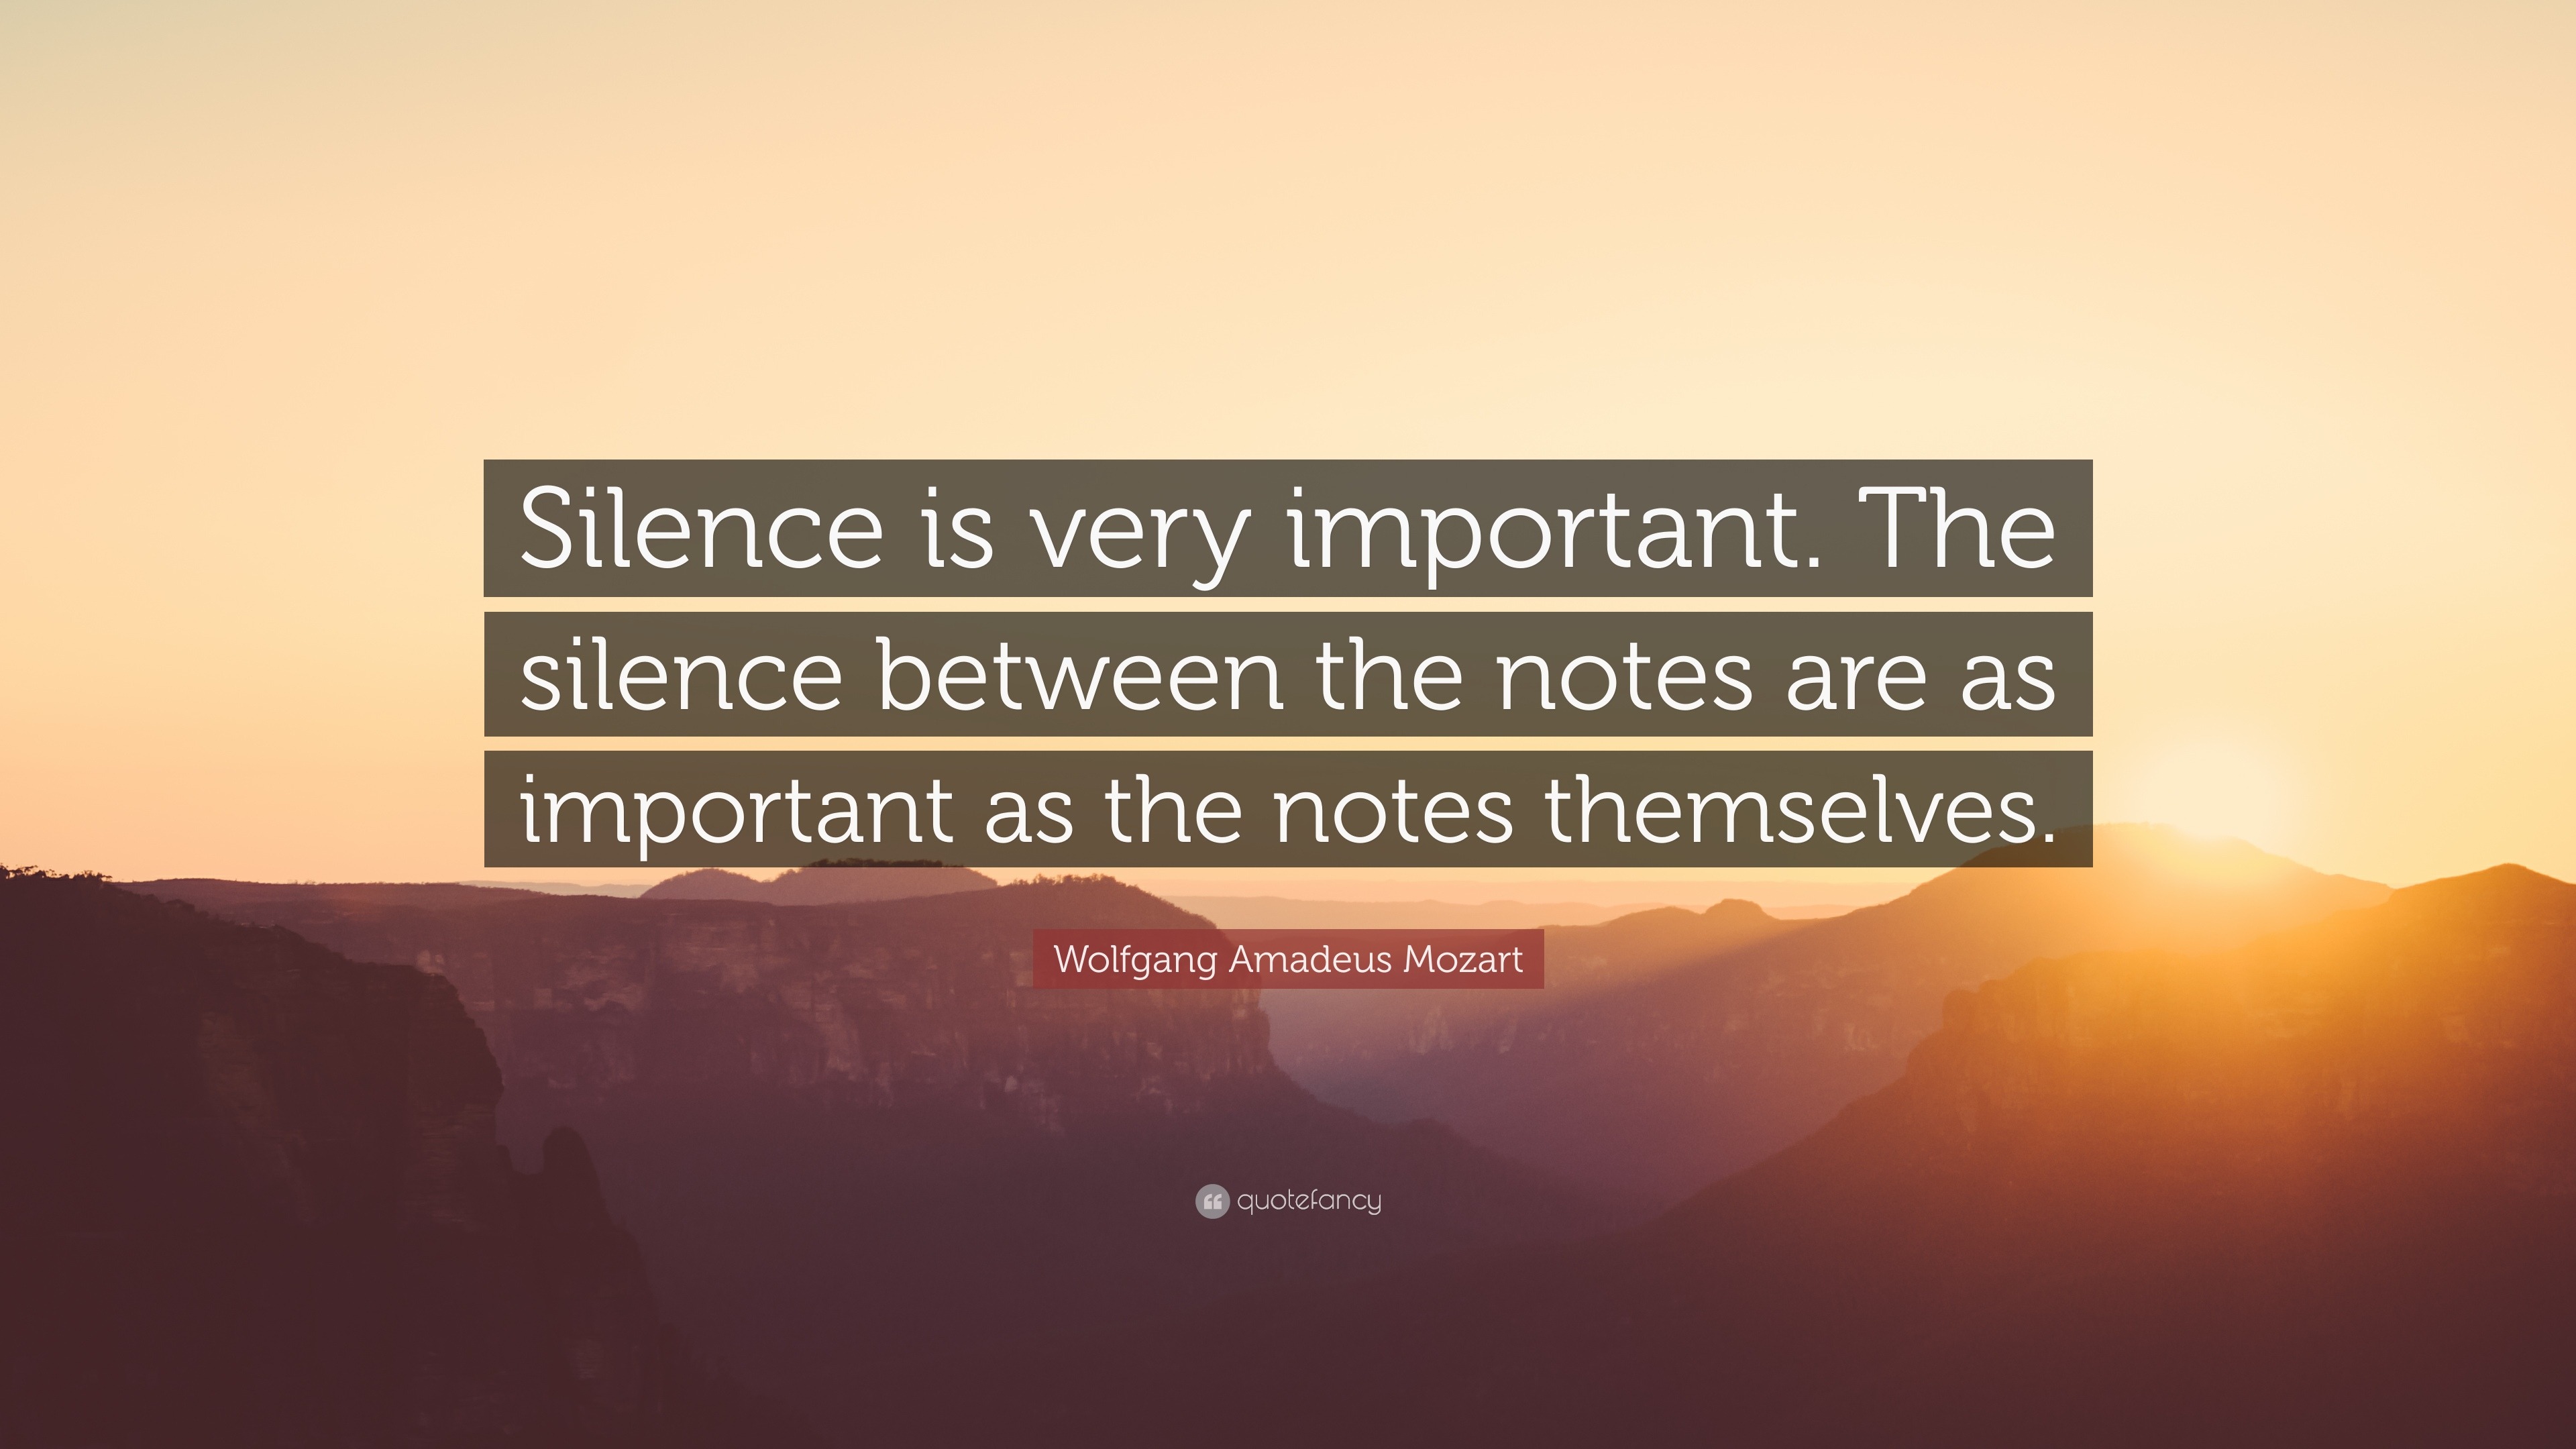 Wolfgang Amadeus Mozart Quote: “Silence is very important. The silence ...